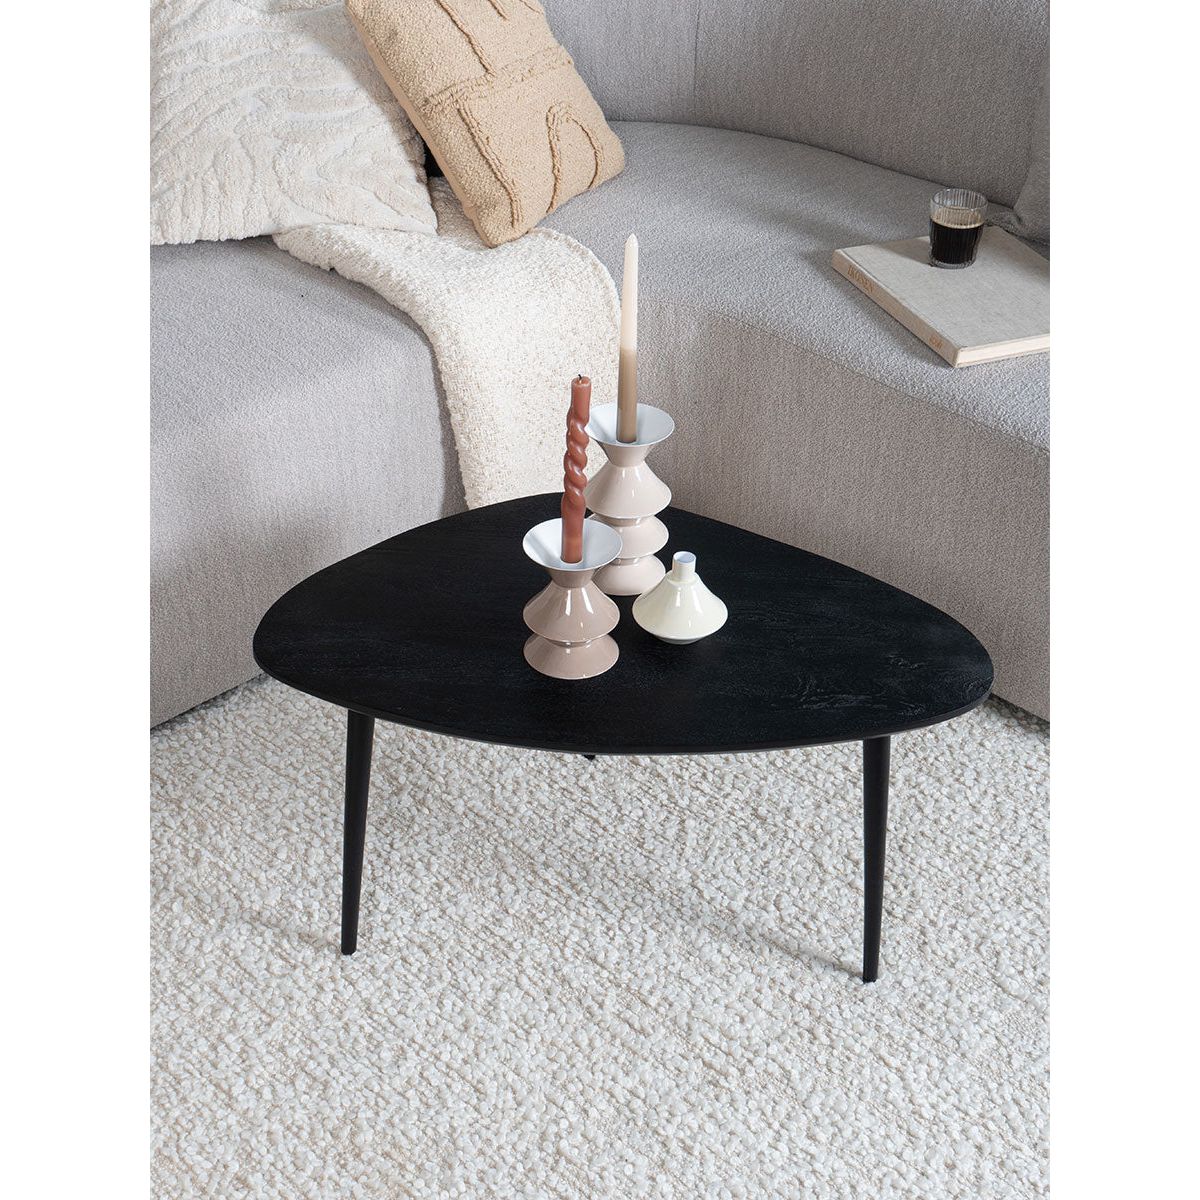 Coffee table Manon Oval